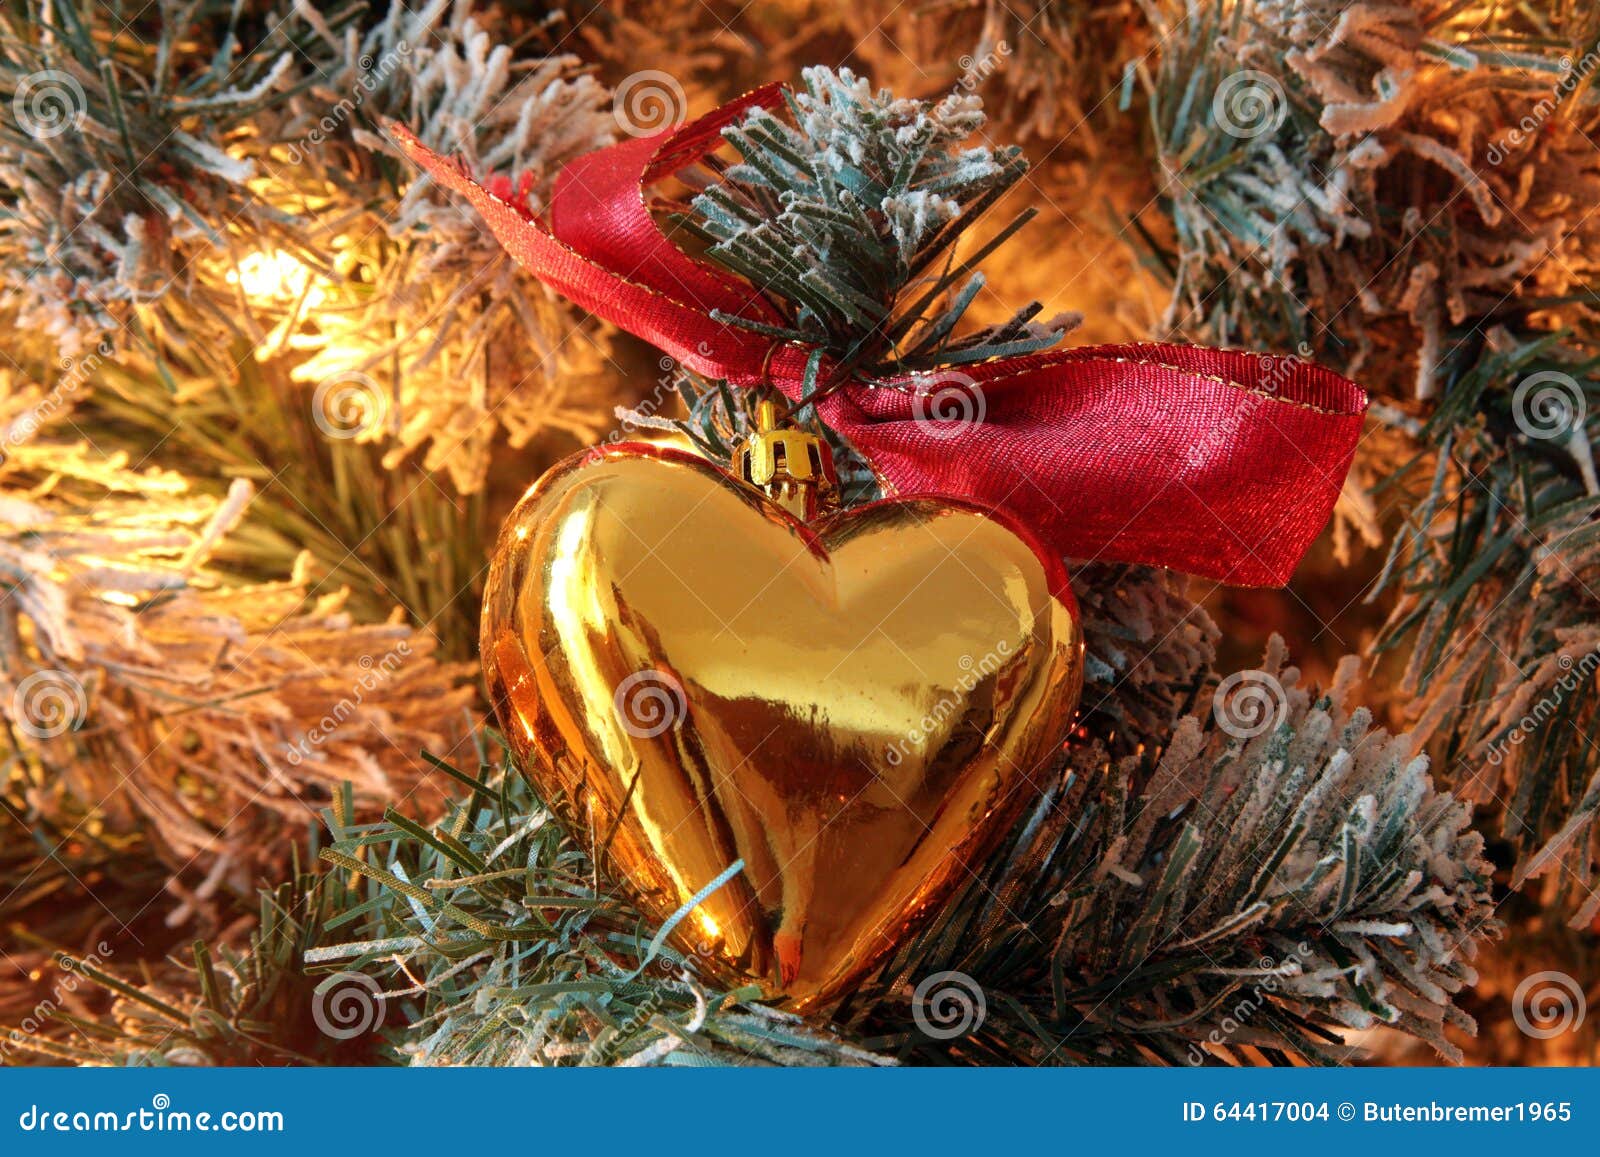 golden hearted christmas tree ornament